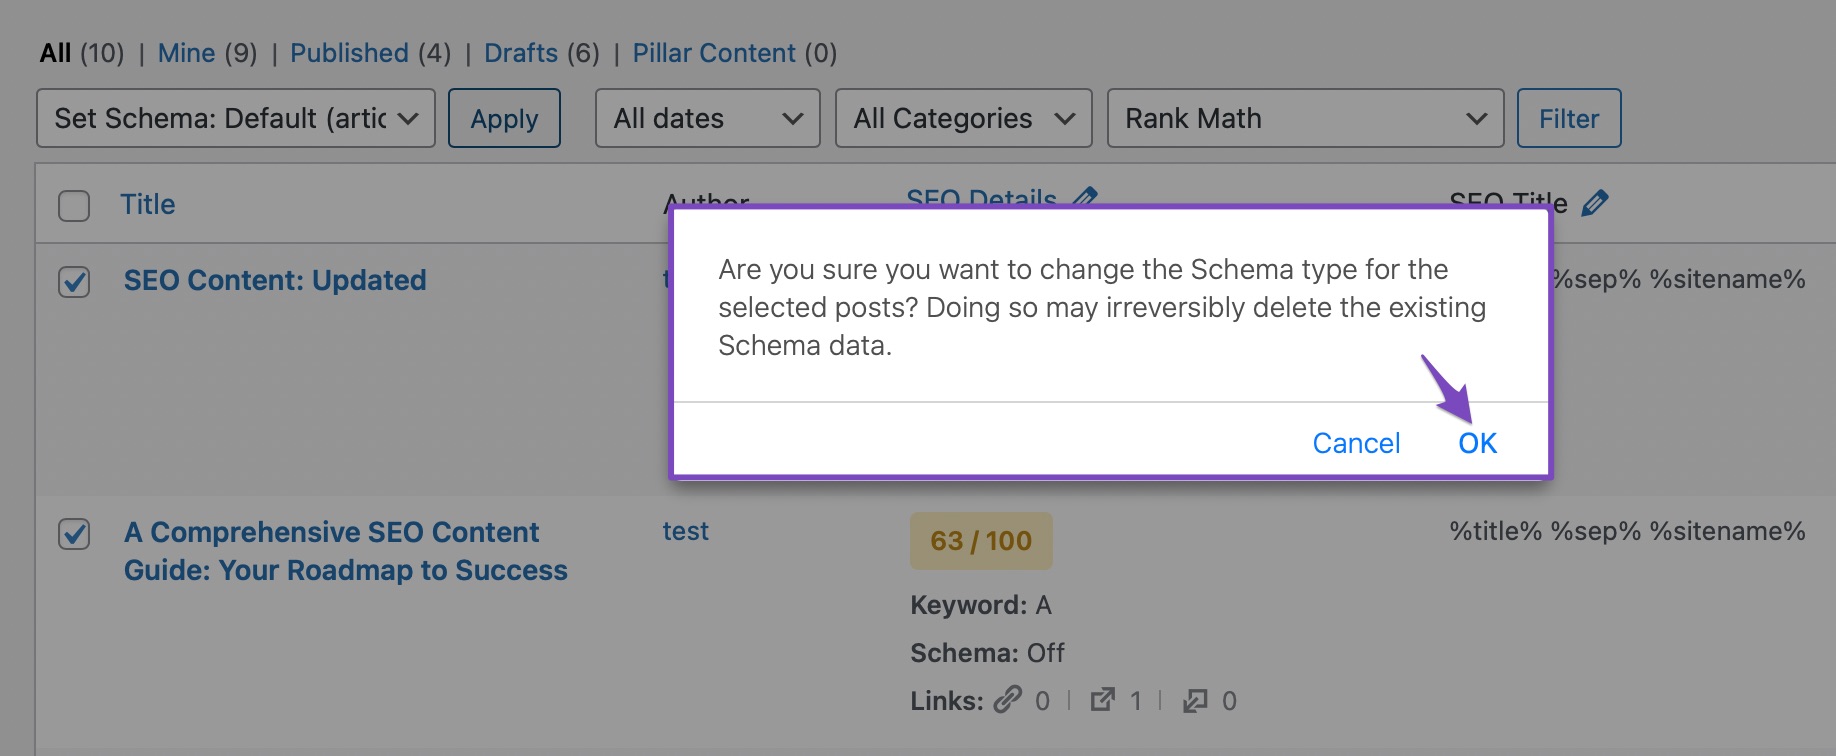 Confirmation prompt for setting default Schema